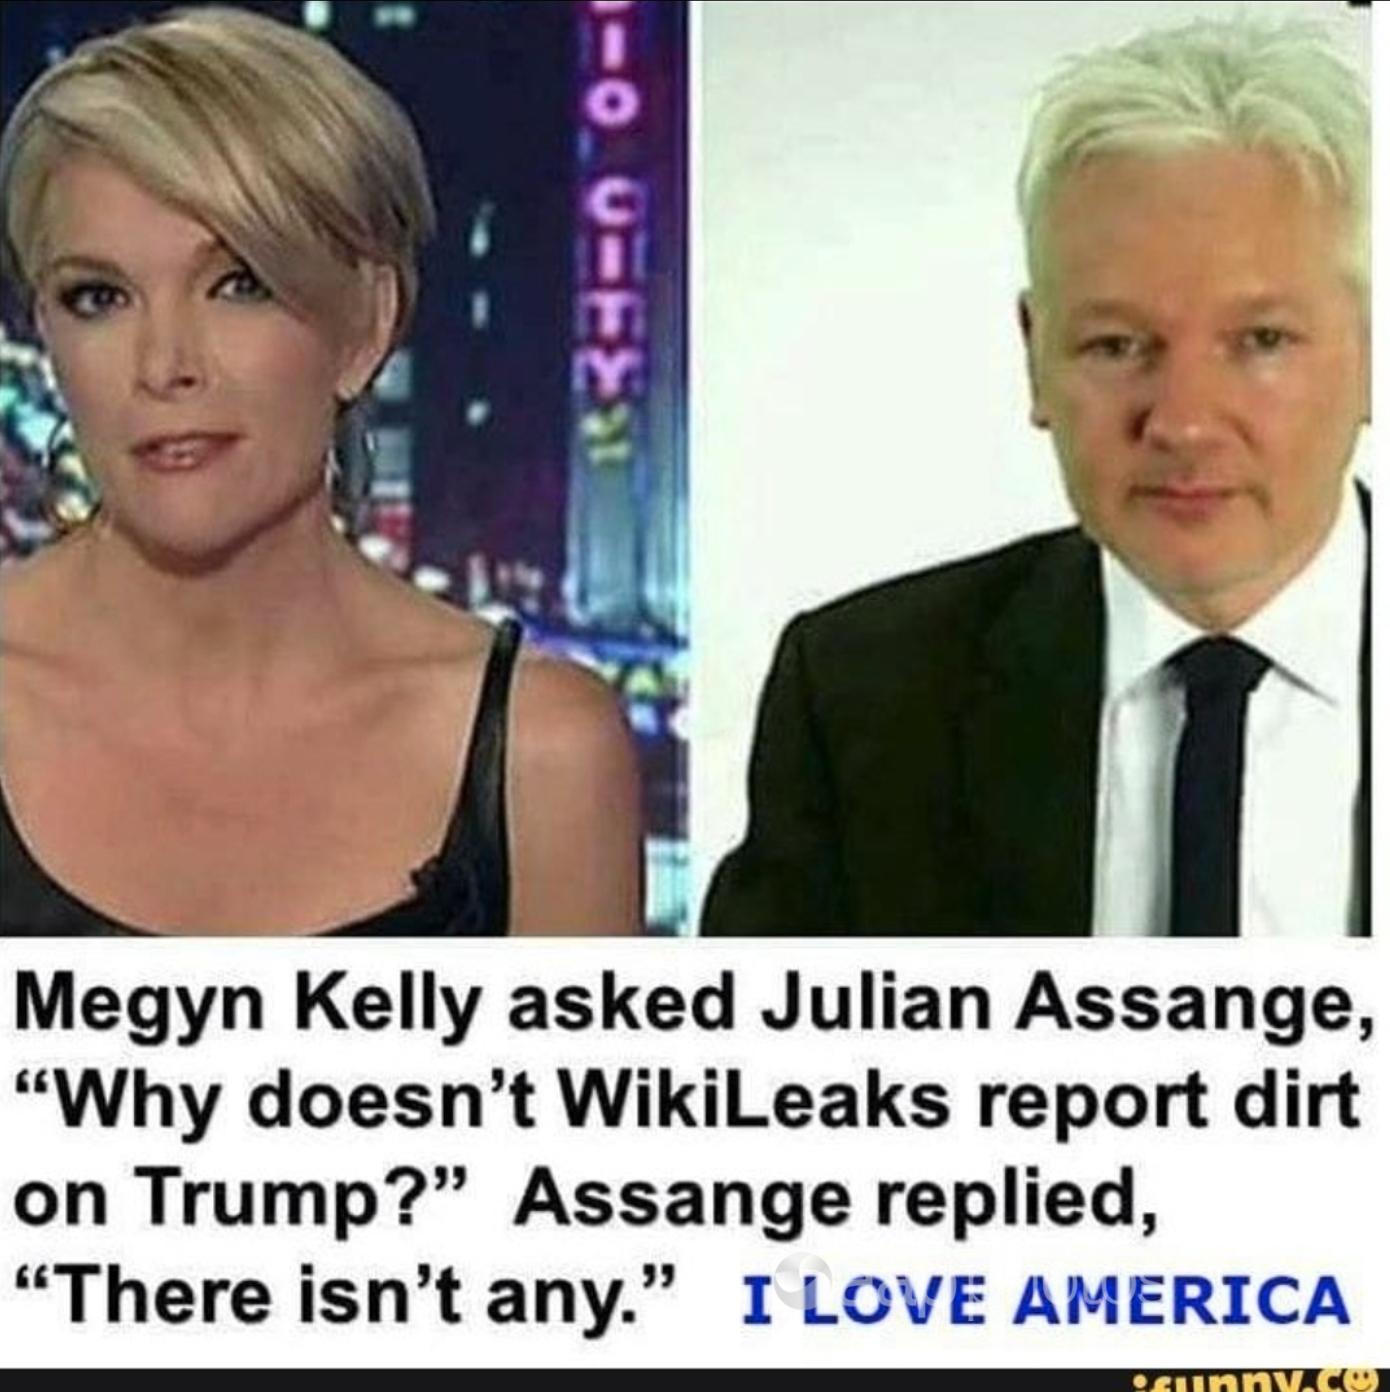 The meme with Julian Assange's purported comments on Trump